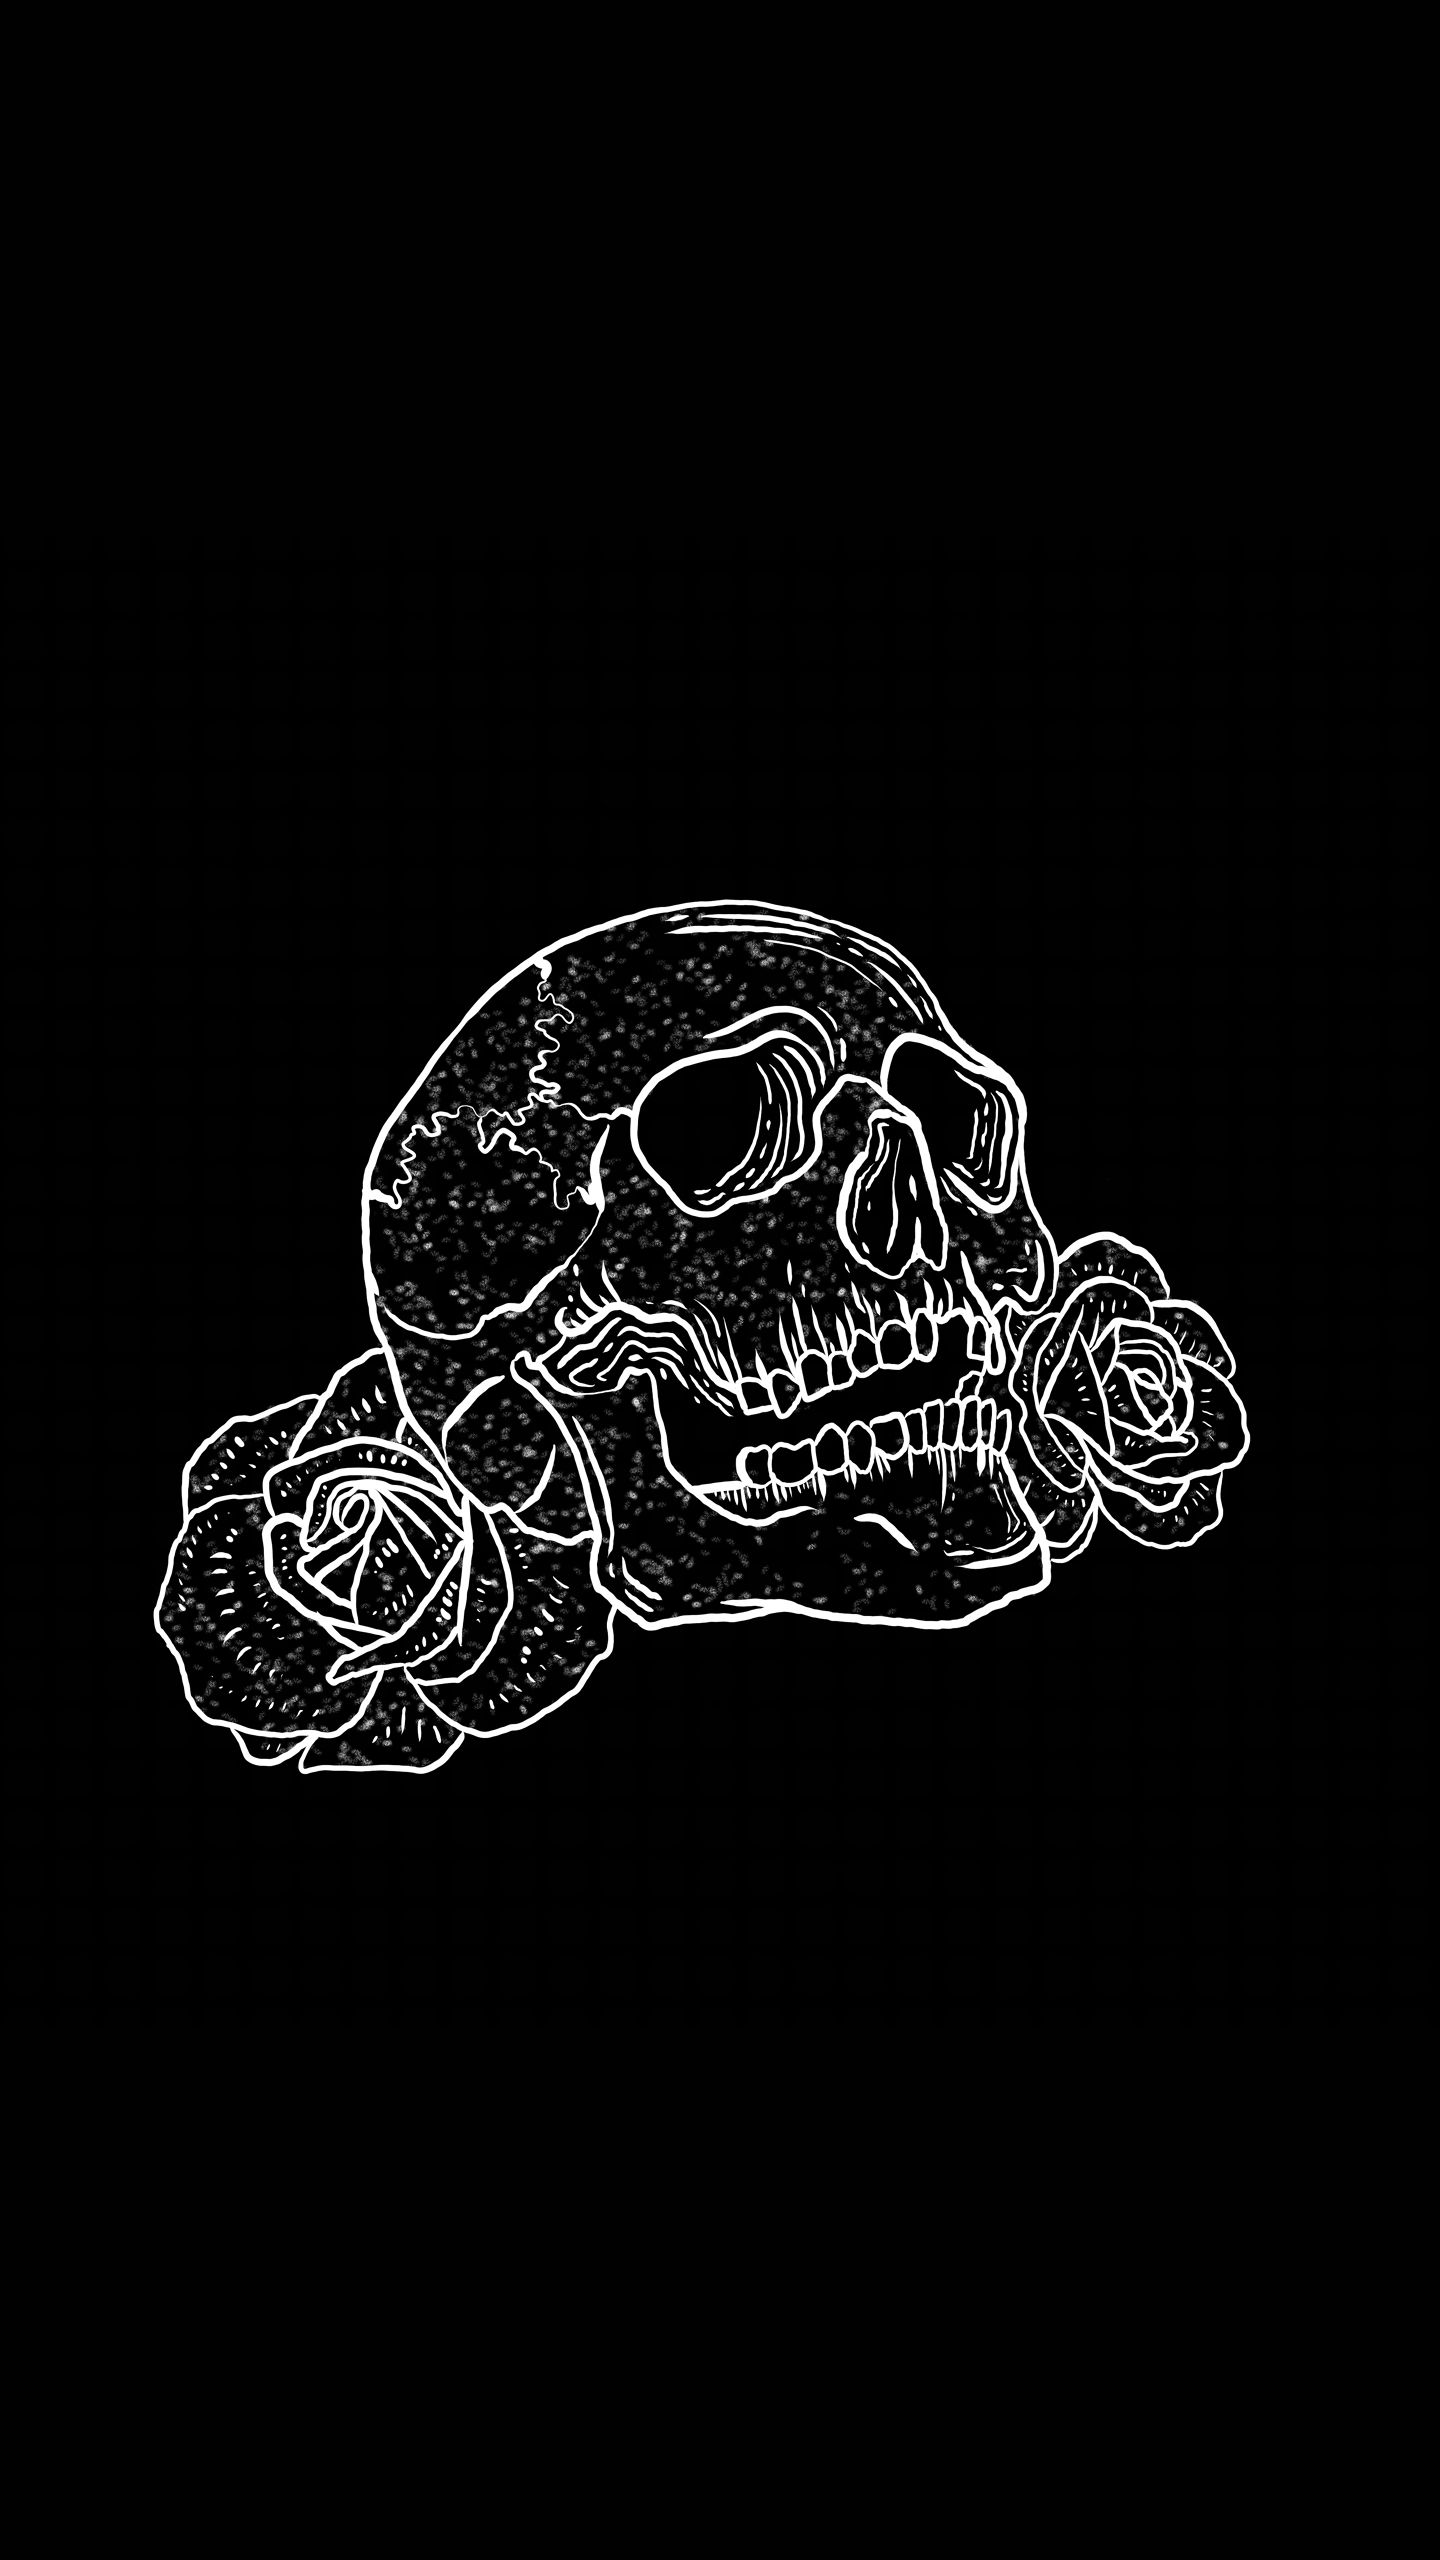 A black and white drawing of the skull with roses - Punk, skull